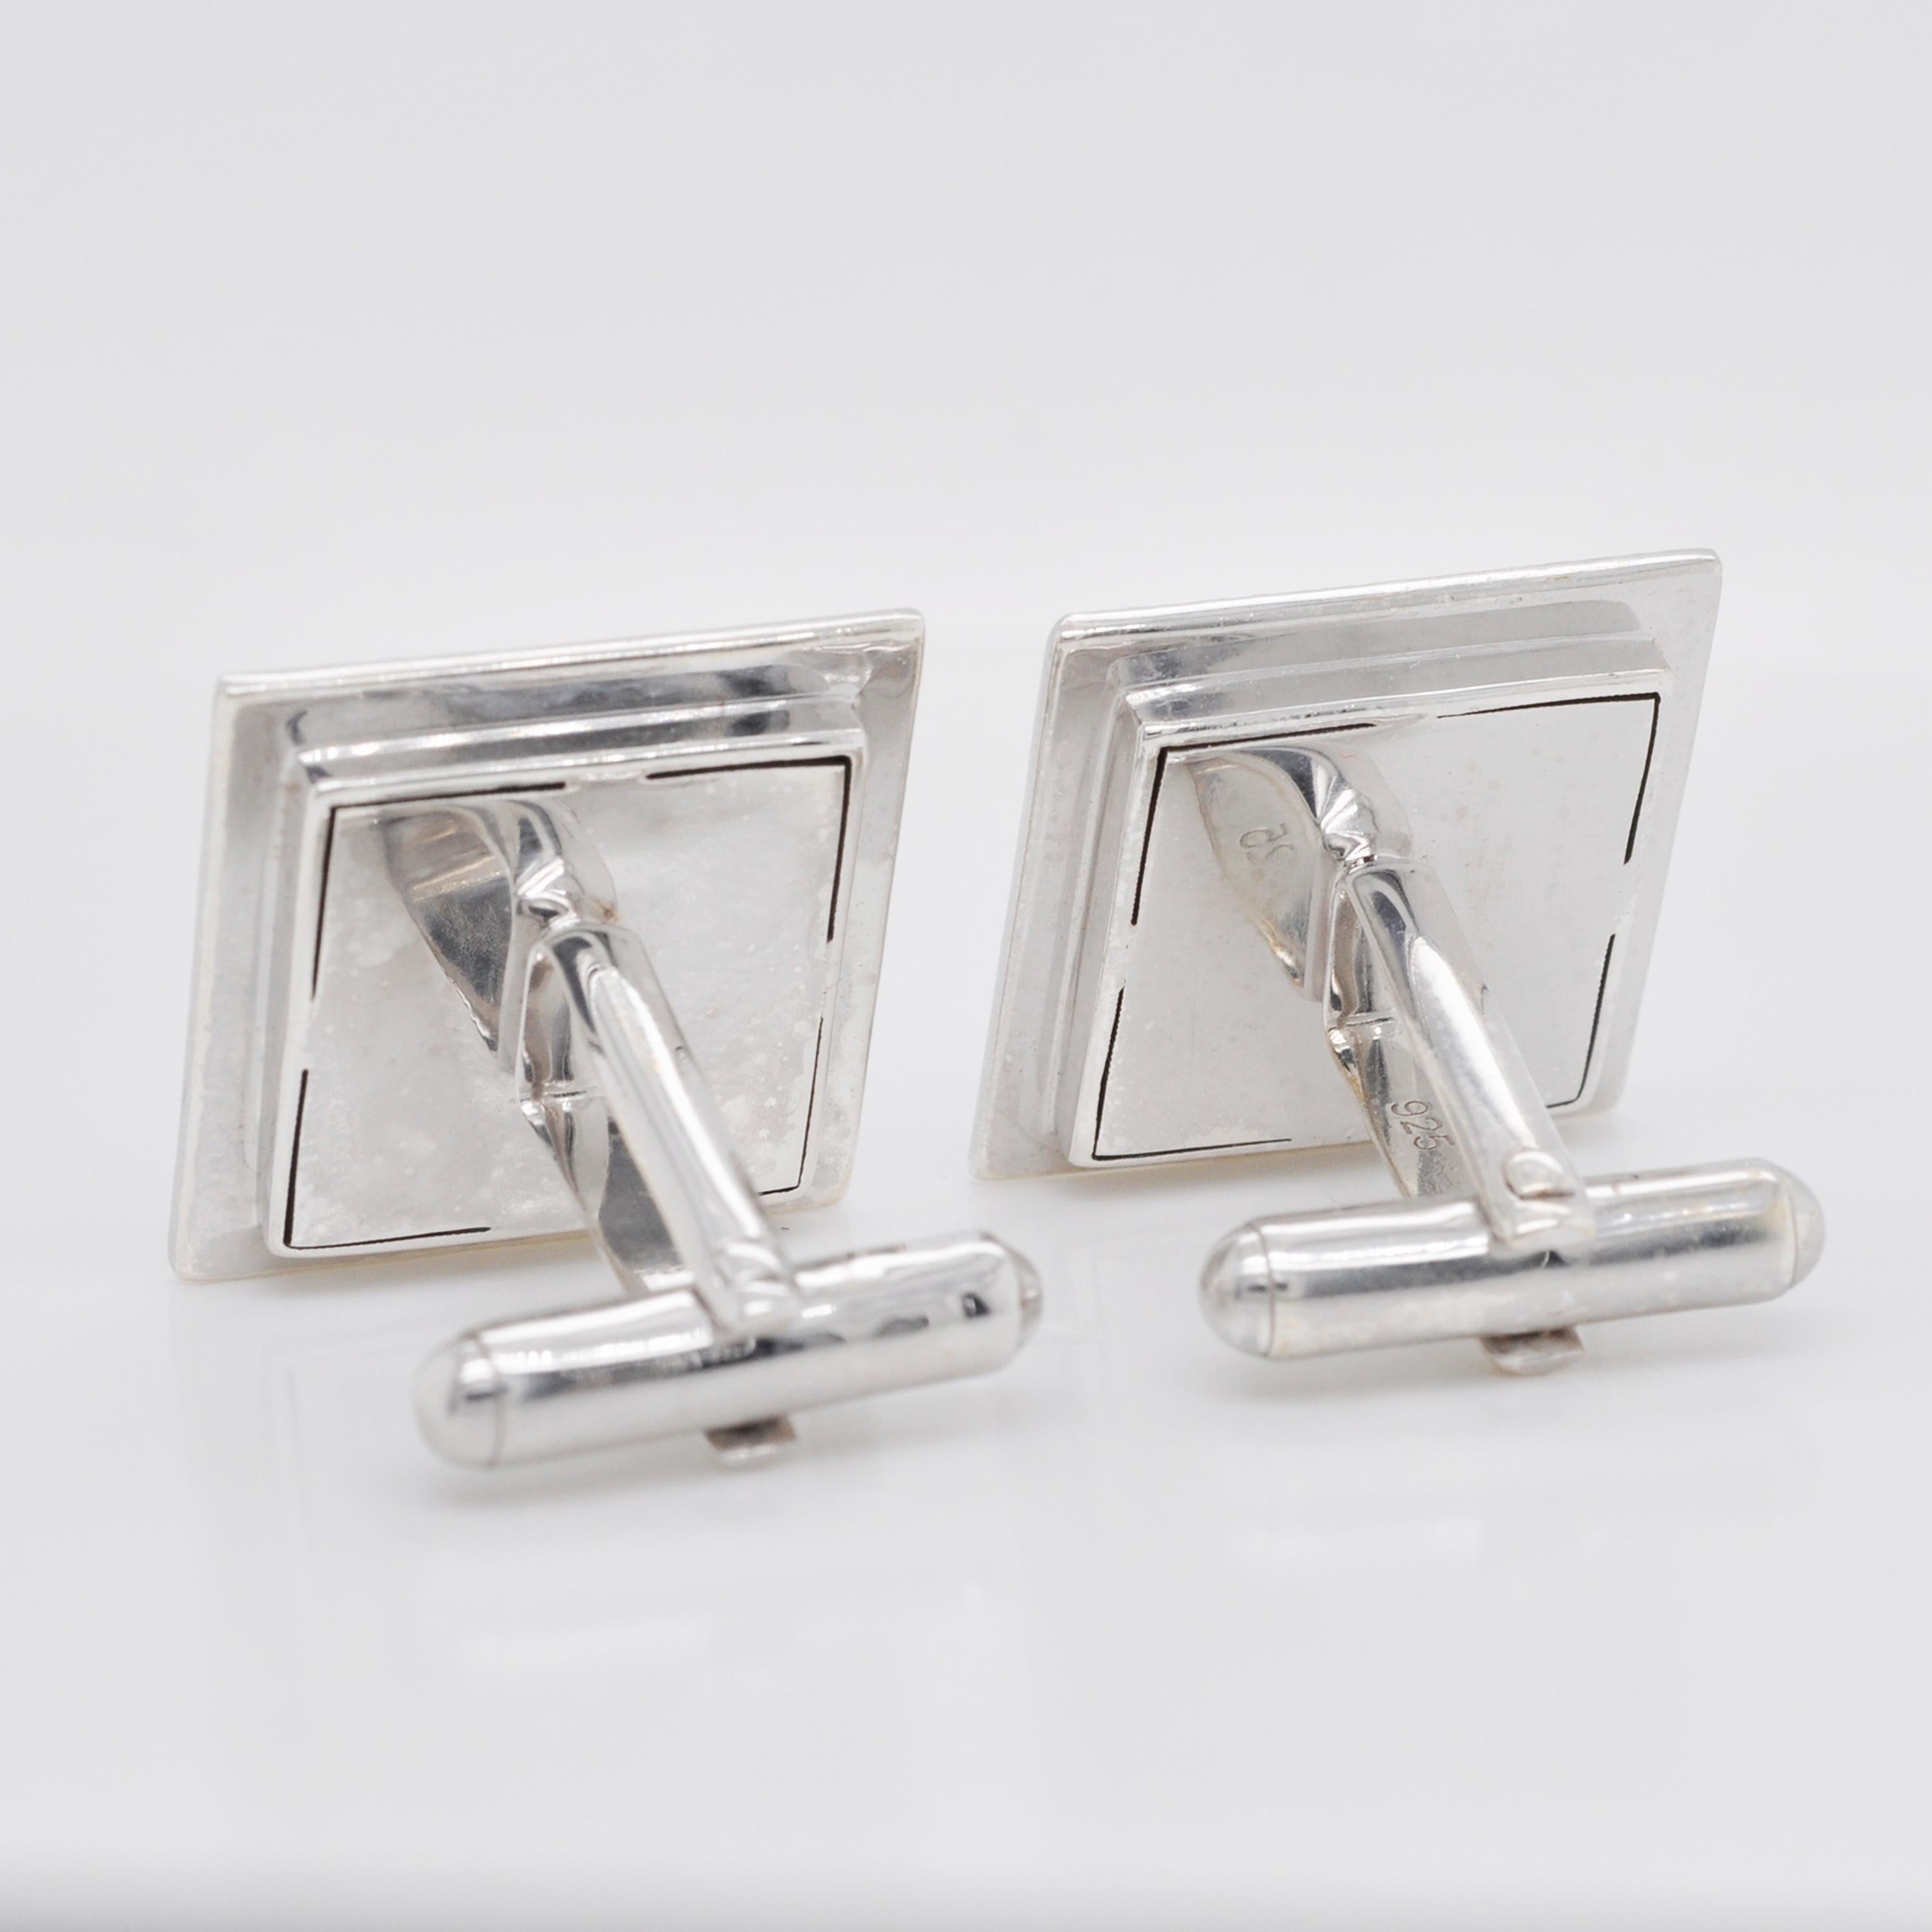 Hand-Carved Abstract Design Square Agate Cameo 925 Sterling Silver Cufflinks In New Condition For Sale In Jaipur, Rajasthan